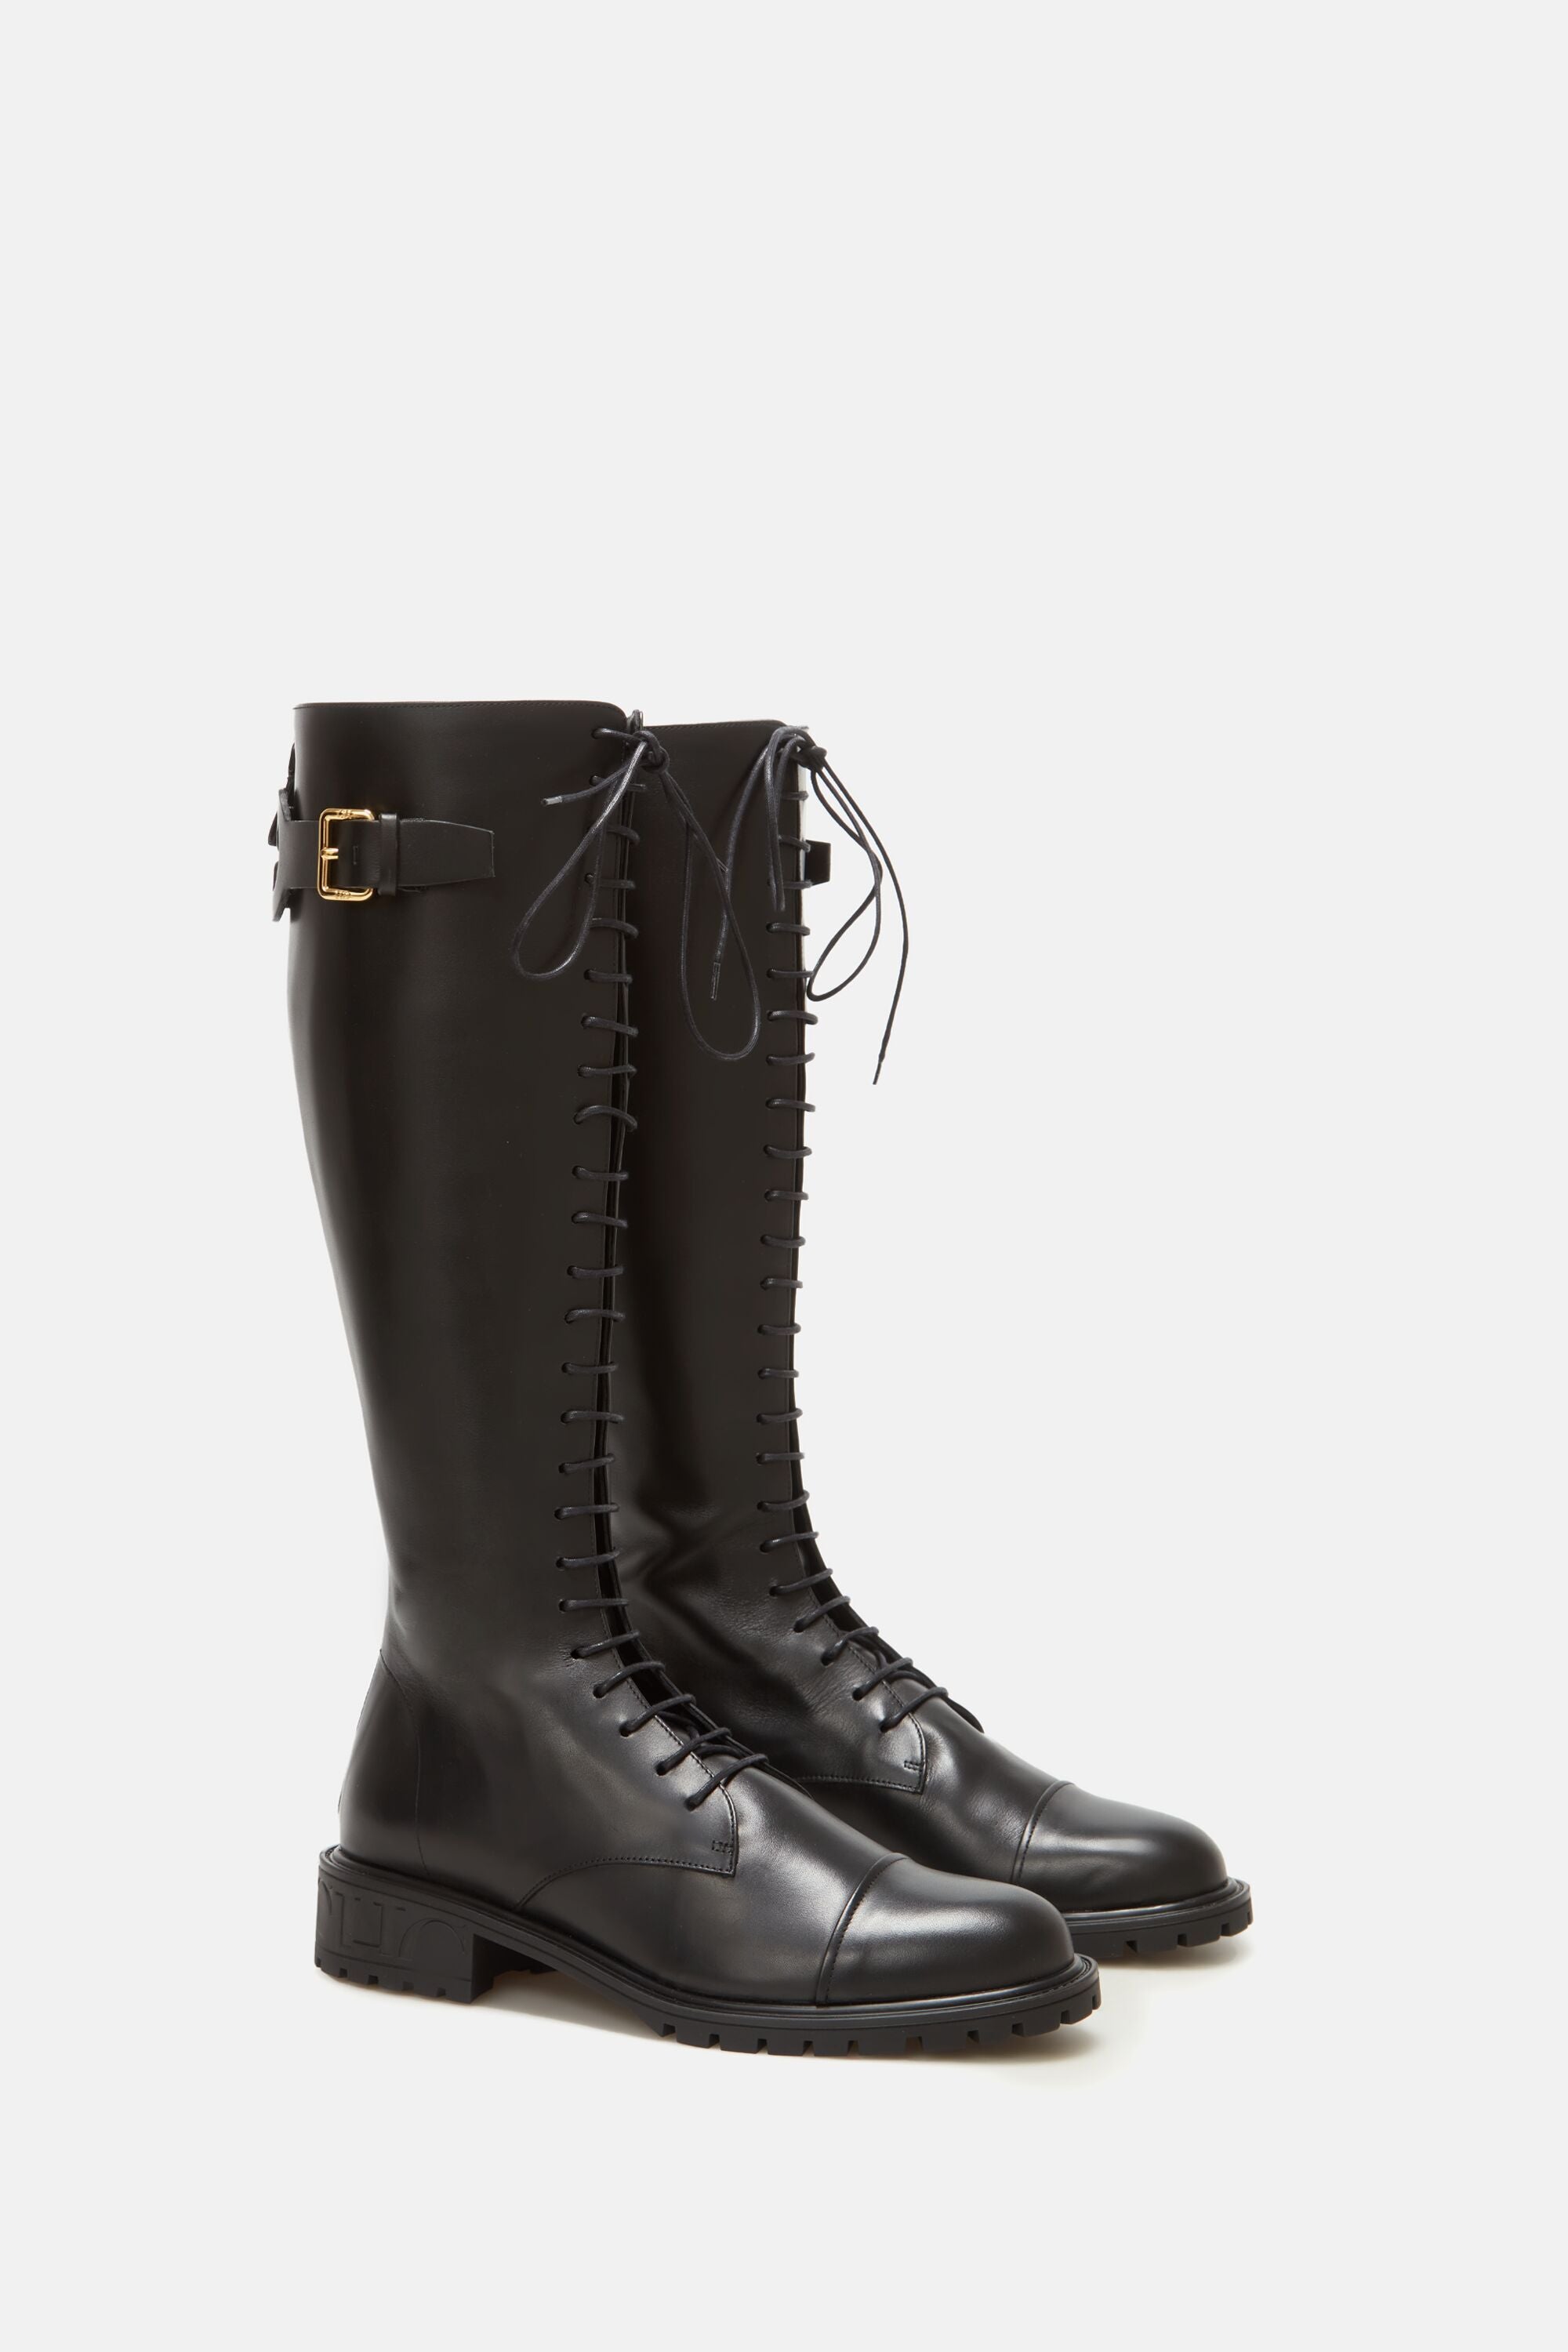 Initials Insignia Leather flat boots